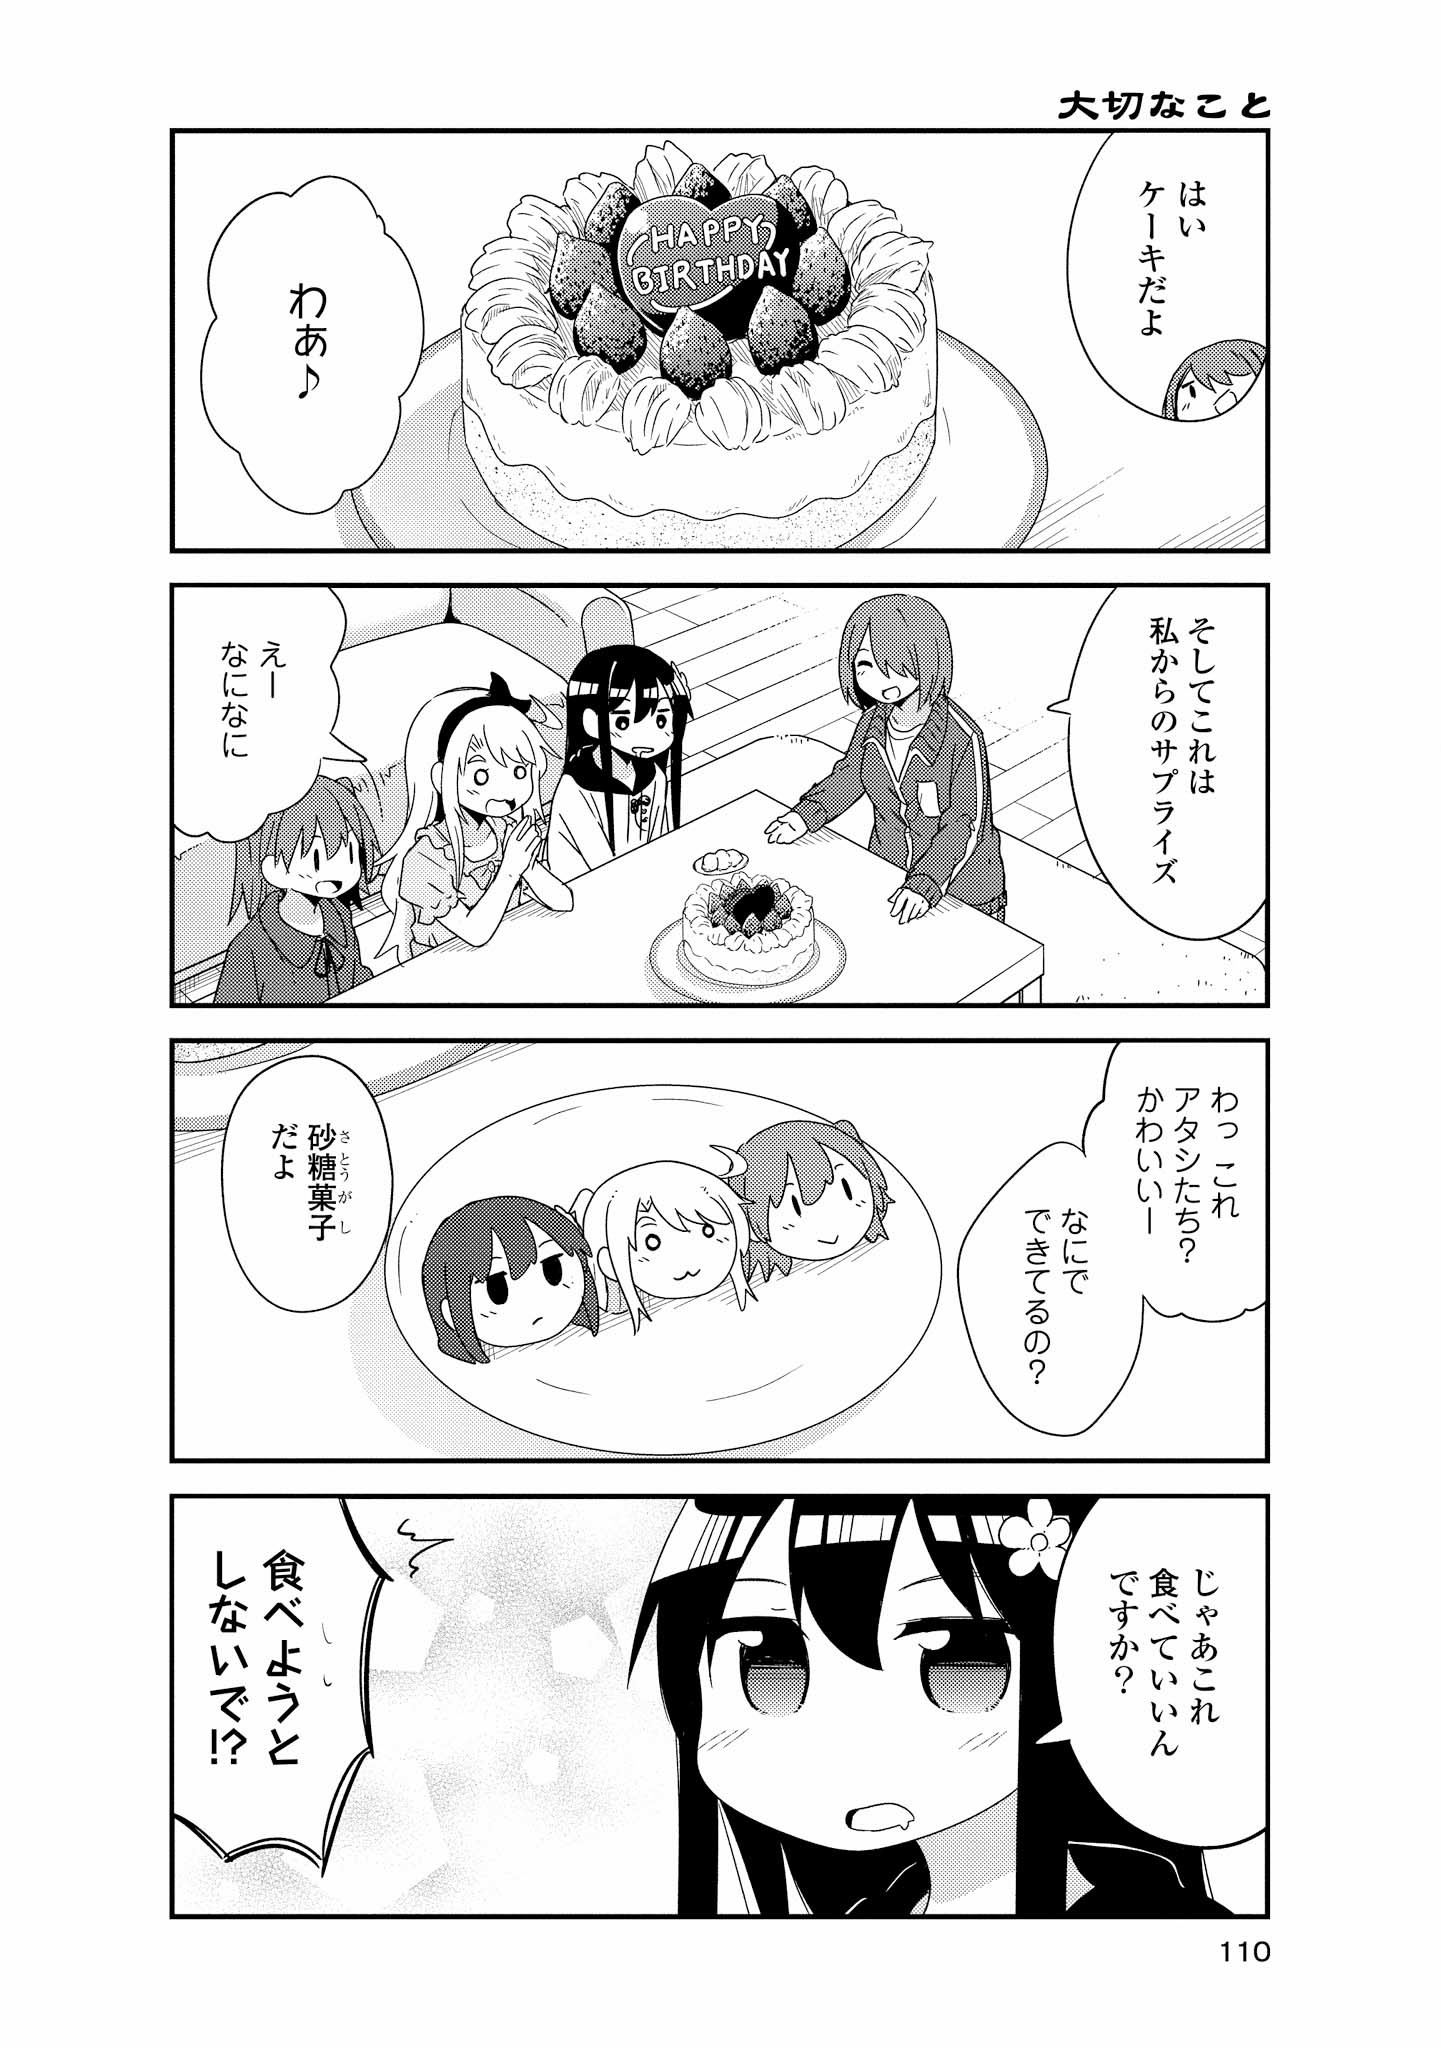 Wataten! An Angel Flew Down to Me 私に天使が舞い降りた！ 第42話 - Page 12